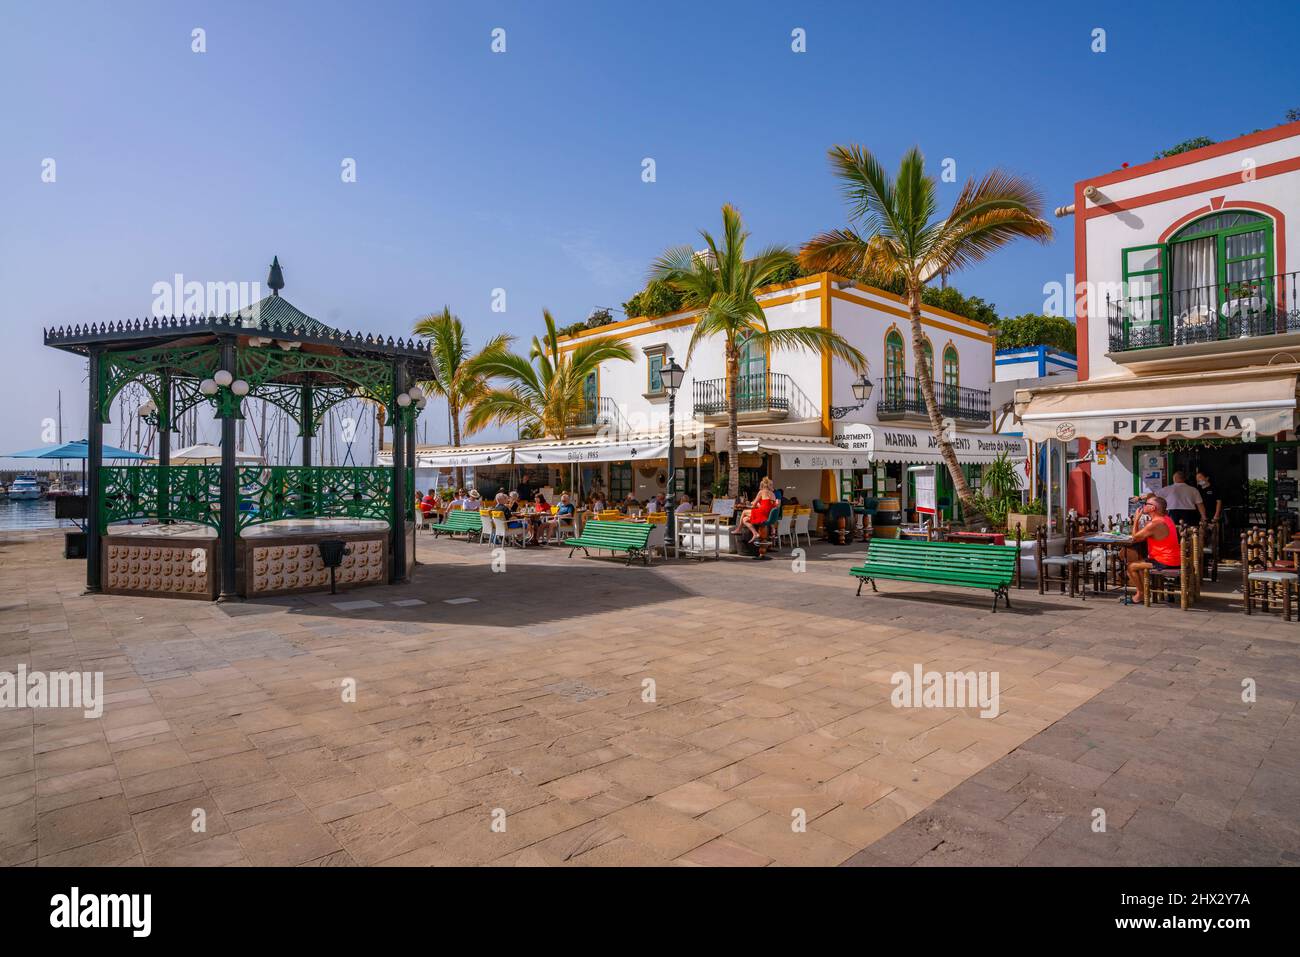 View of bandstand, cafes and shops along the promenade in the old town, Puerto de Mogan, Gran Canaria, Canary Islands, Spain, Europe Stock Photo